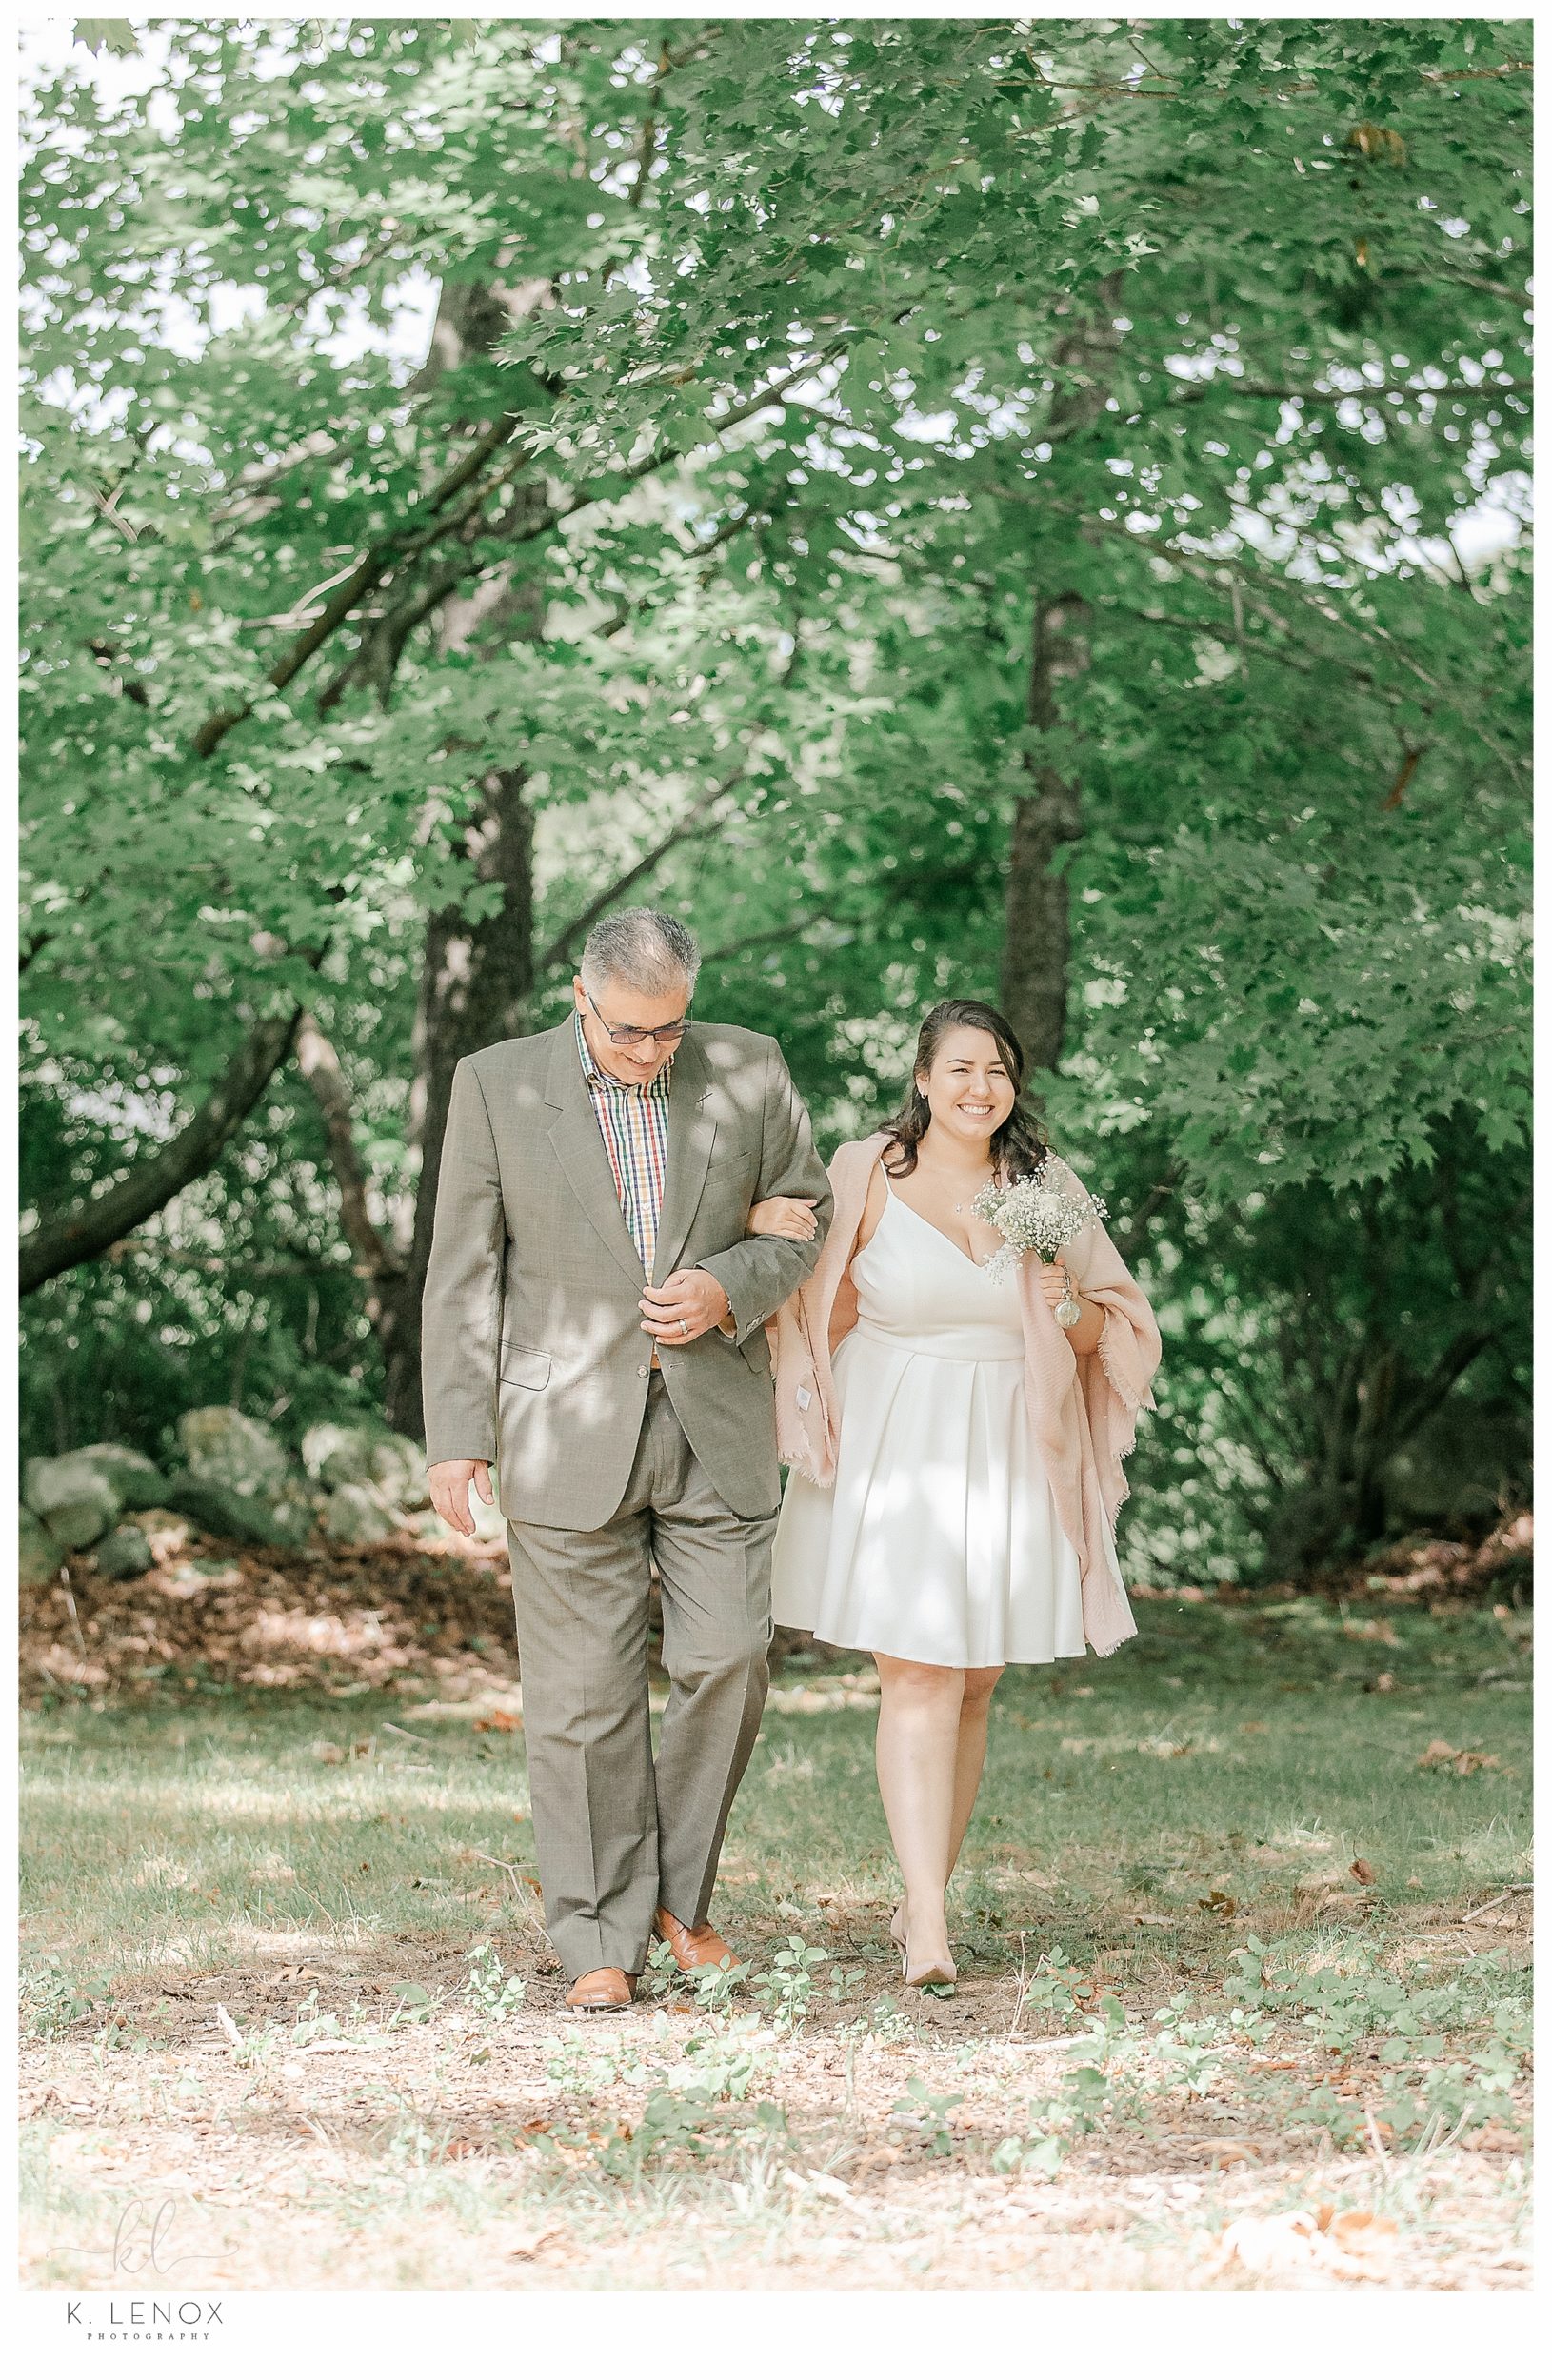 Backyard Elopement- Father walks Bride down the aisle.  Light and Airy Photo. 